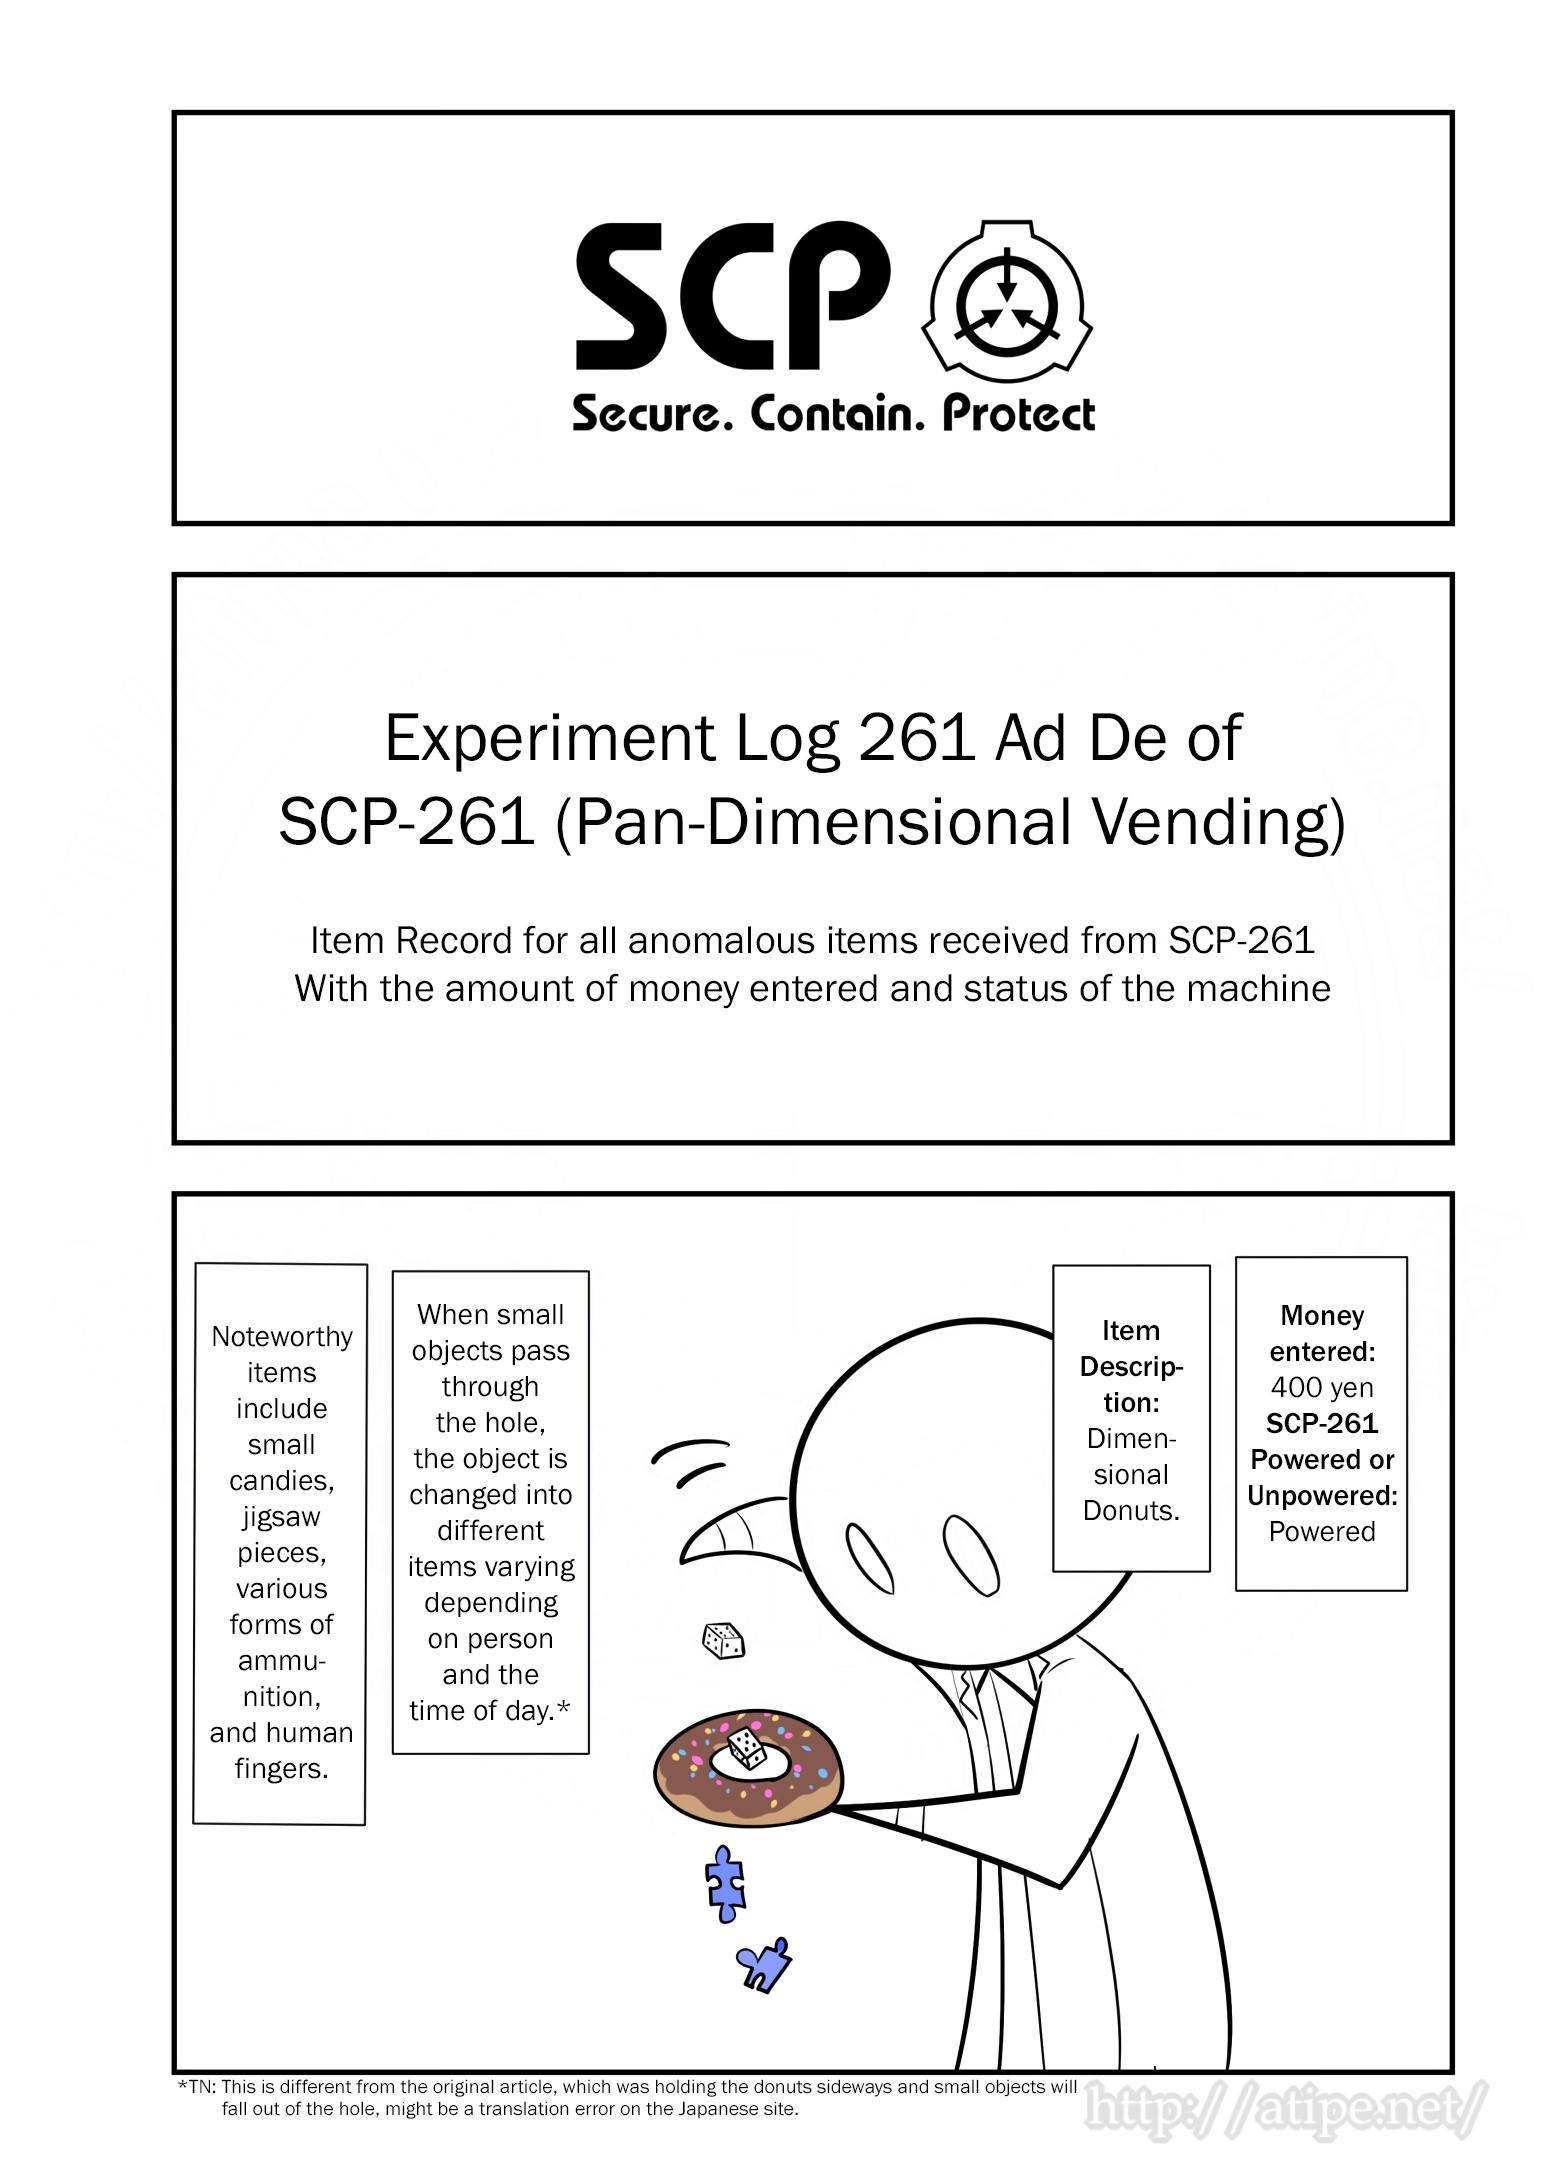 SCP-682 VS SCP-165 based on Experiment Logs by Dr Gears: https